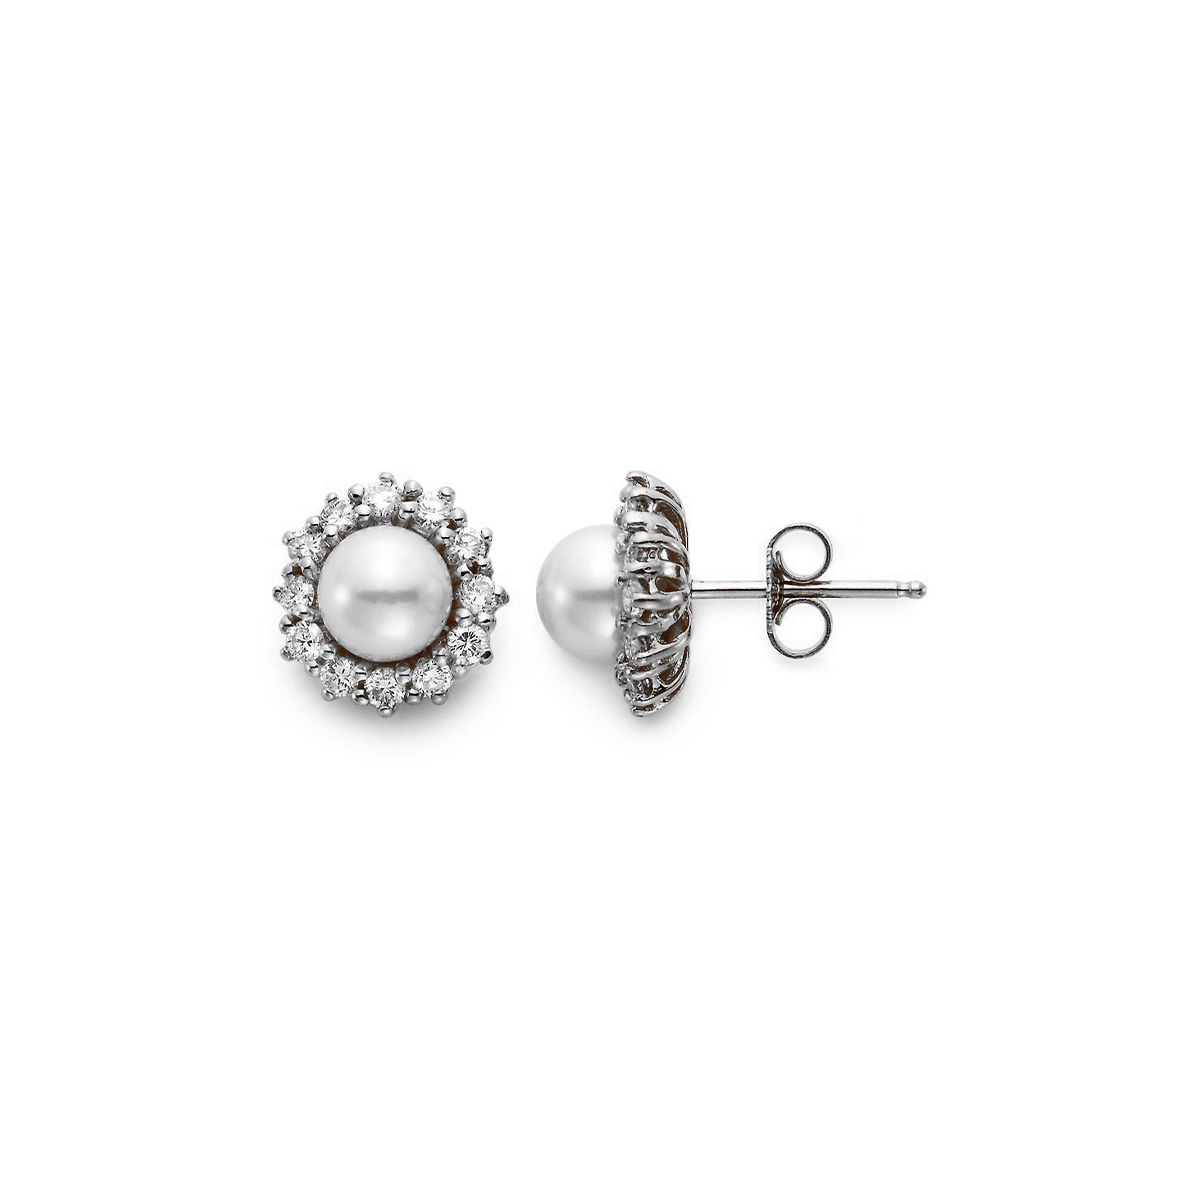 18K White Gold 7.5 mm Cultured Pearl and Diamond Halo Earrings